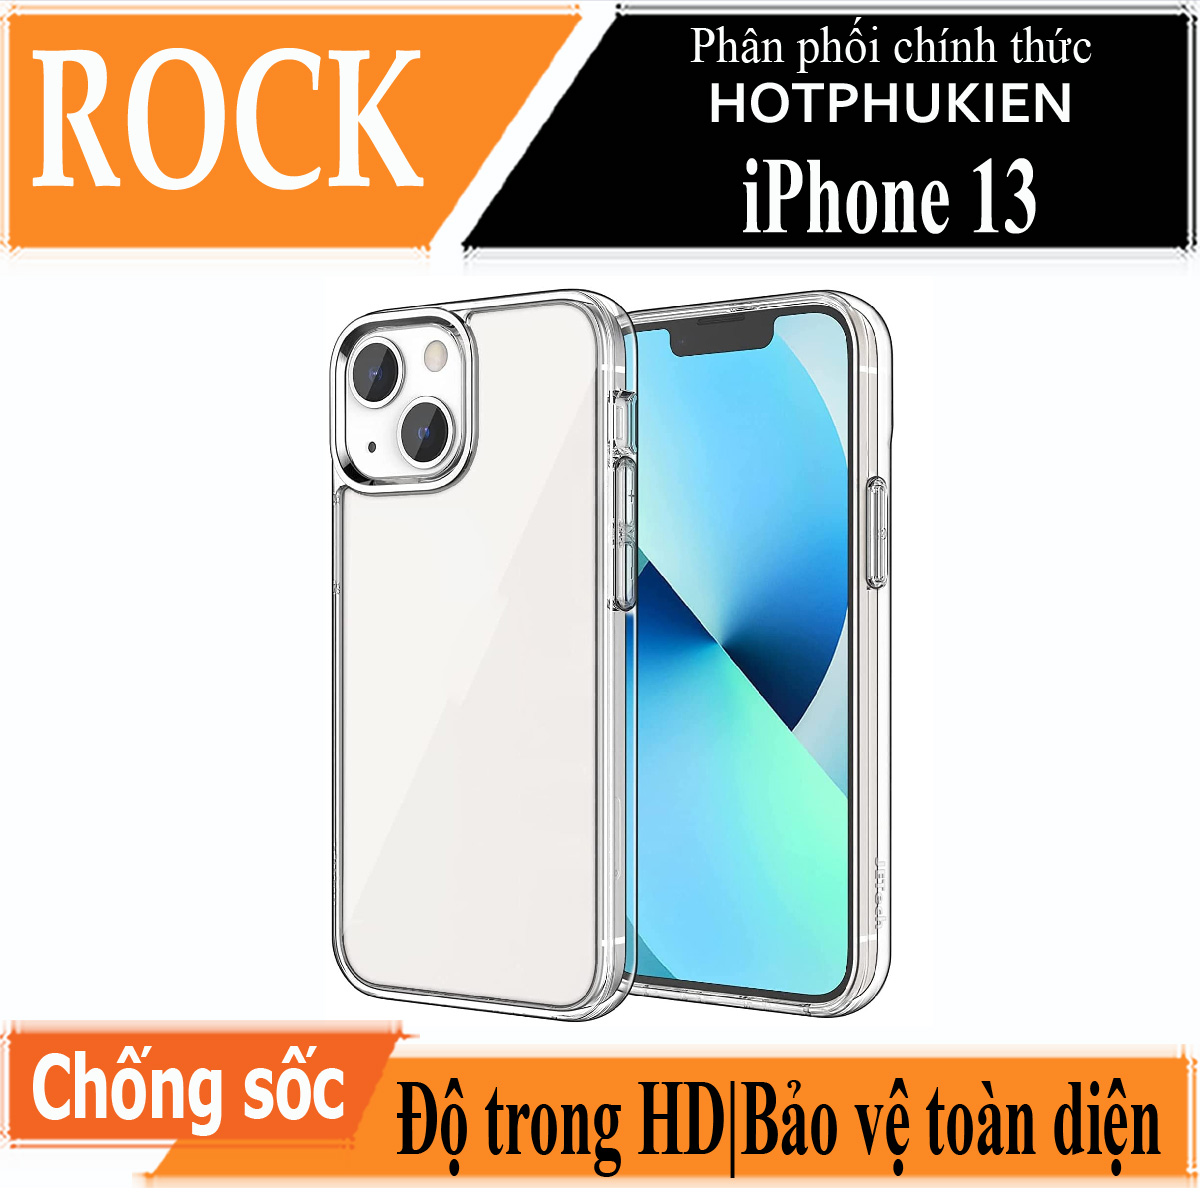 Ốp lưng chống sốc trong suốt cho iPhone 13 hiệu Rock Space Protective Case